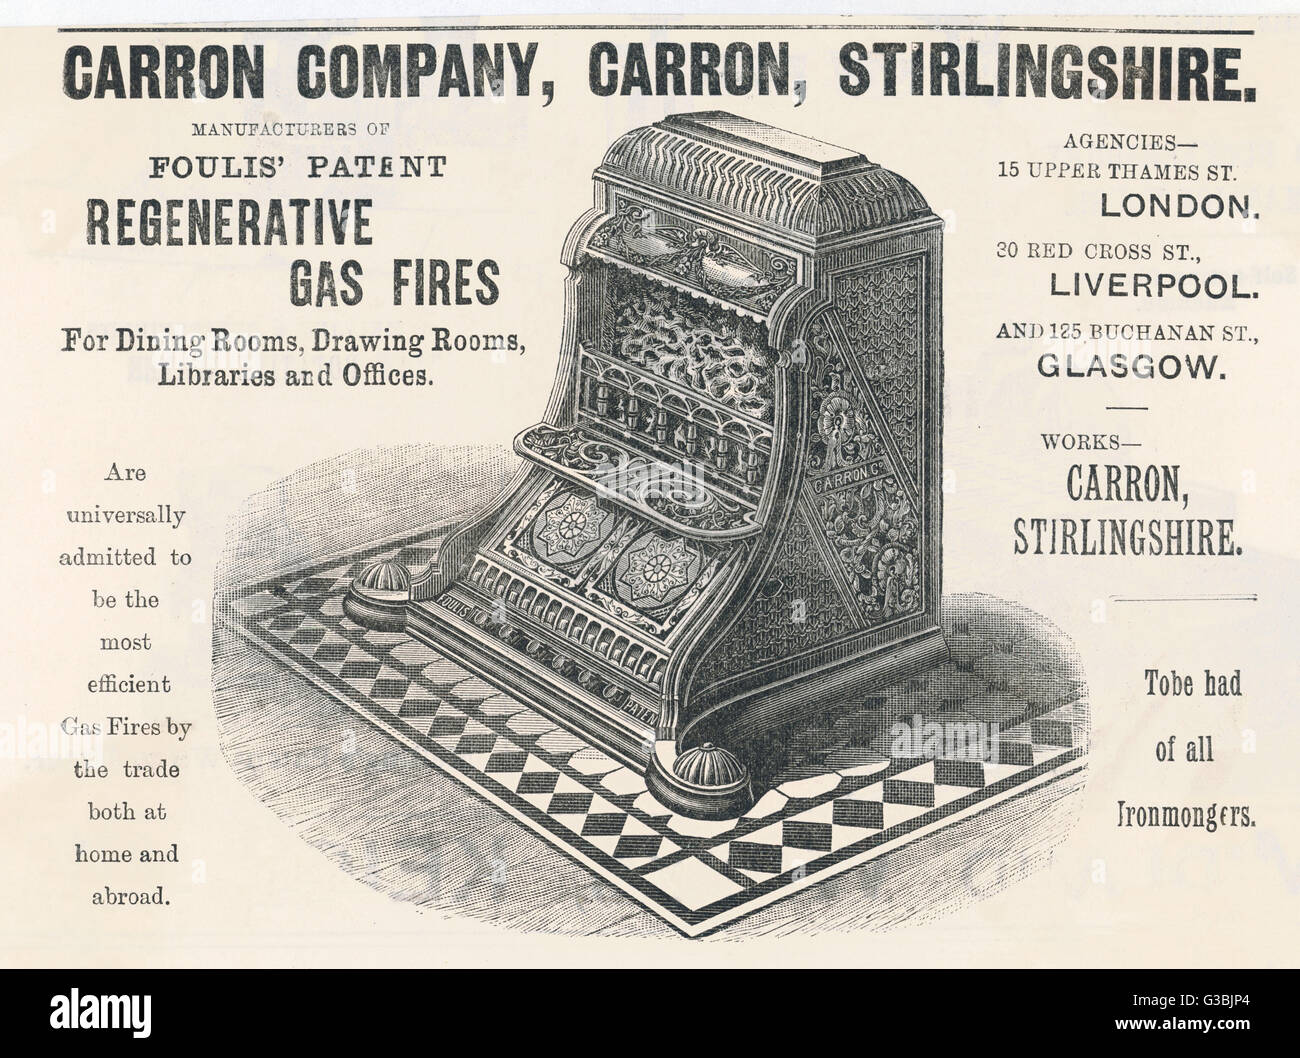 Foulis' Patent Regenerative  Gas fire, supplied by the  Carron Company. 'Universally  admitted to be the most  efficient gas fires by the  trade both at home and abroad'     Date: 1889 Stock Photo